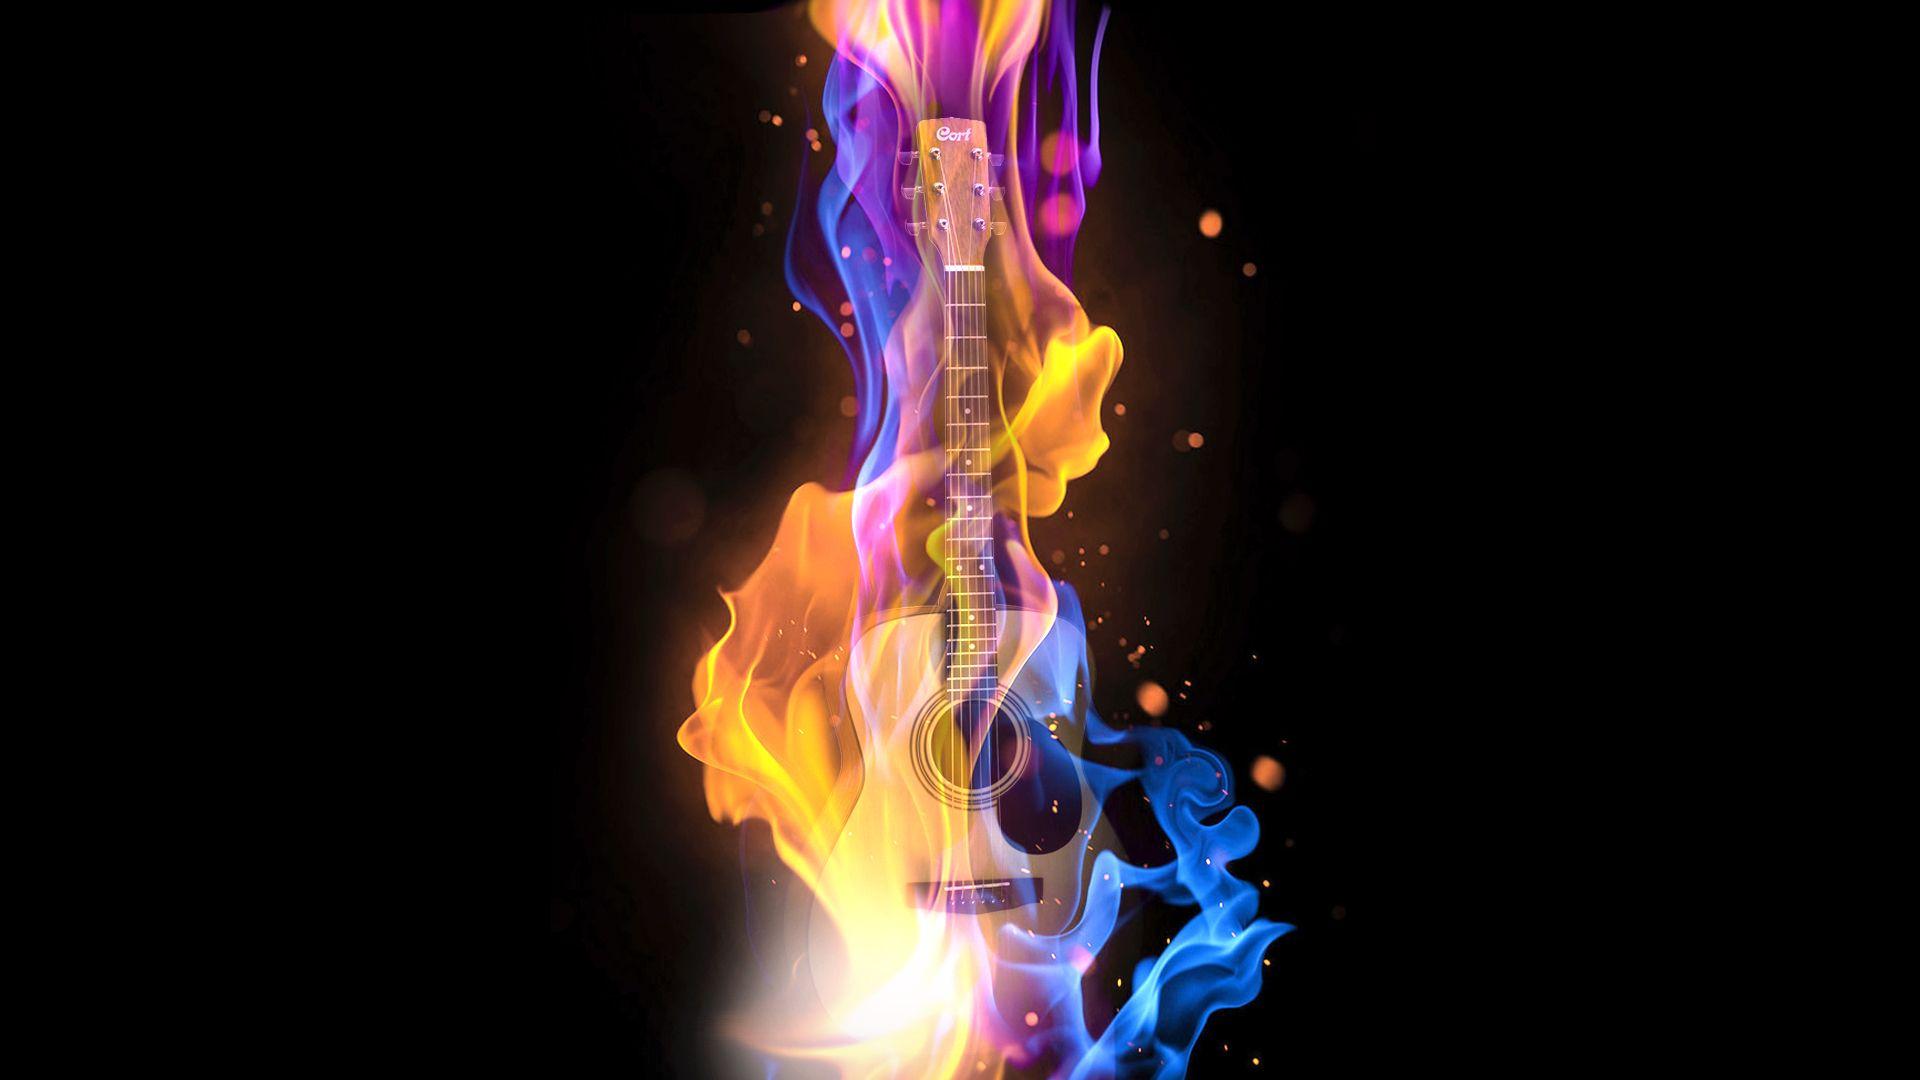 Fiery guitar wallpaper and image, picture, photo